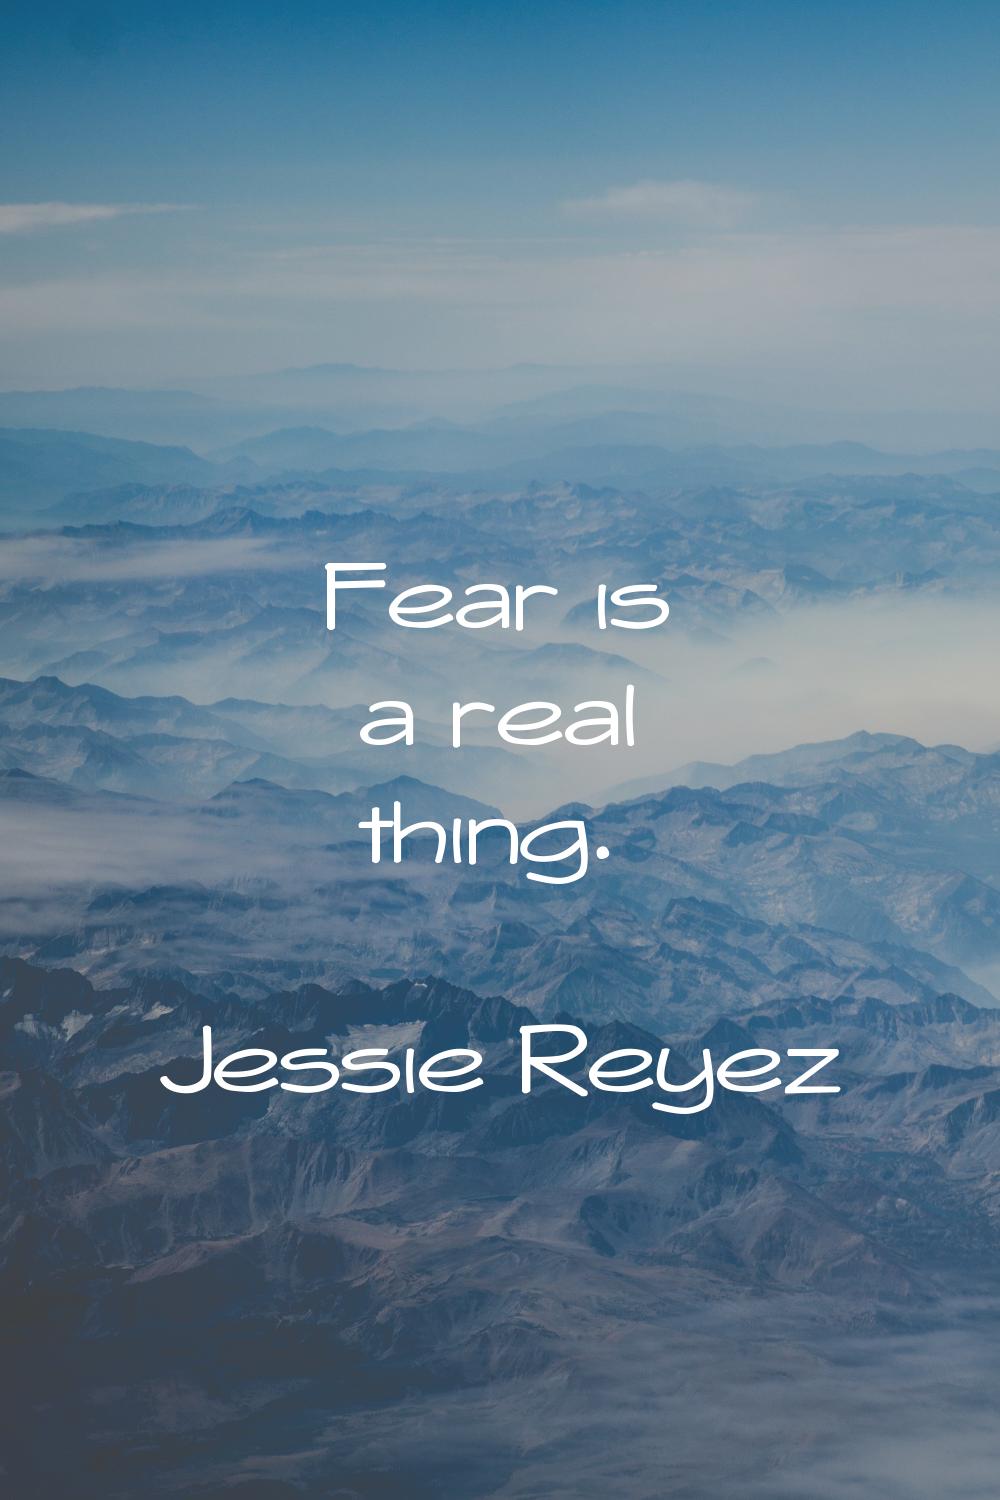 Fear is a real thing.